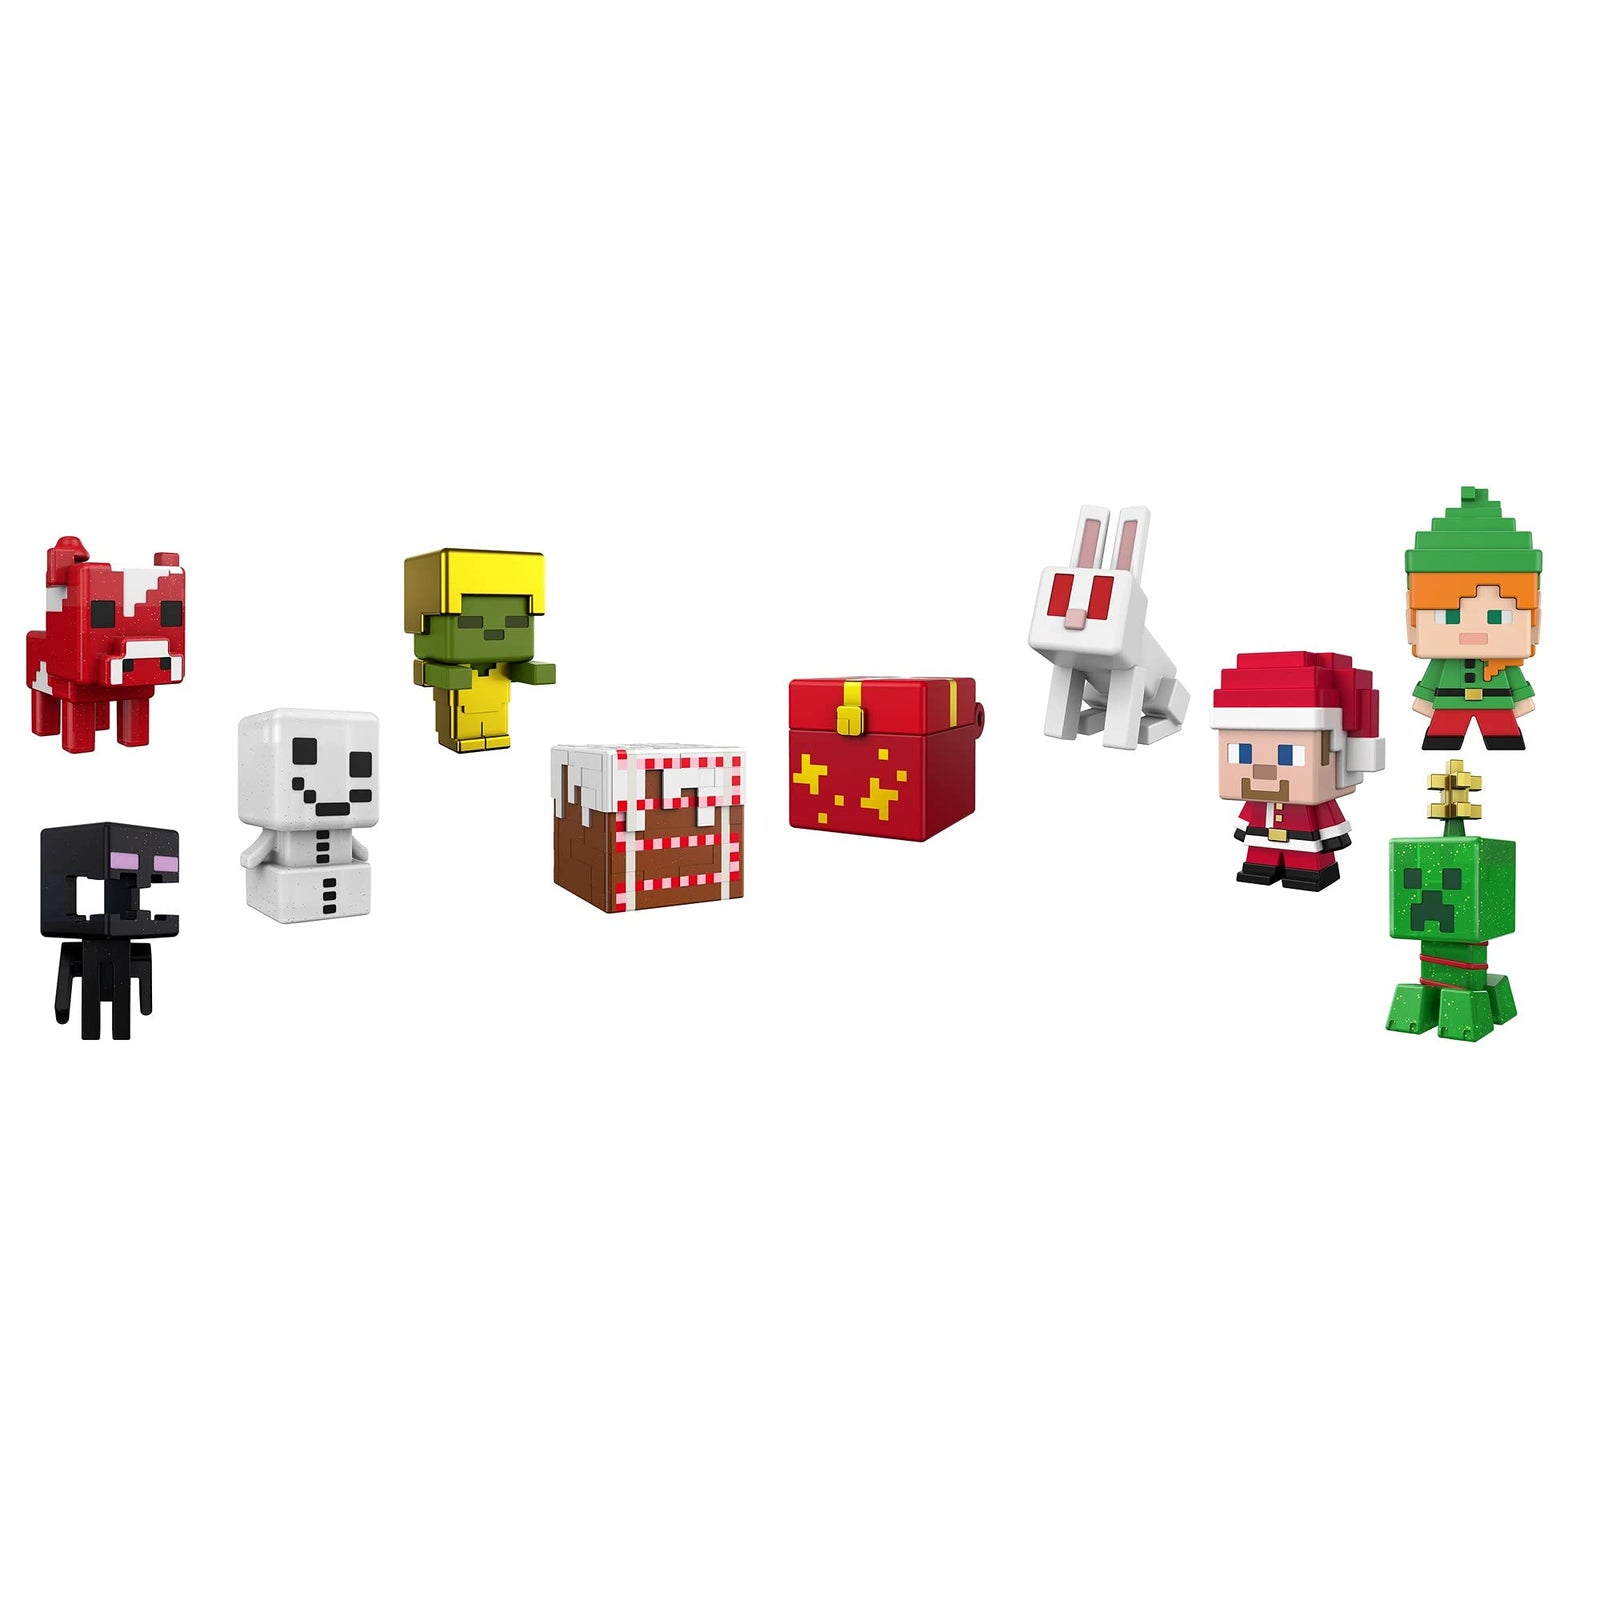 Minecraft Mini Figures 2021 Advent Calendar, One A Day Storytelling Fun with Minecraft Characters and Stickers, Holiday Activity Gift, for Kids Age 6 Years & Older